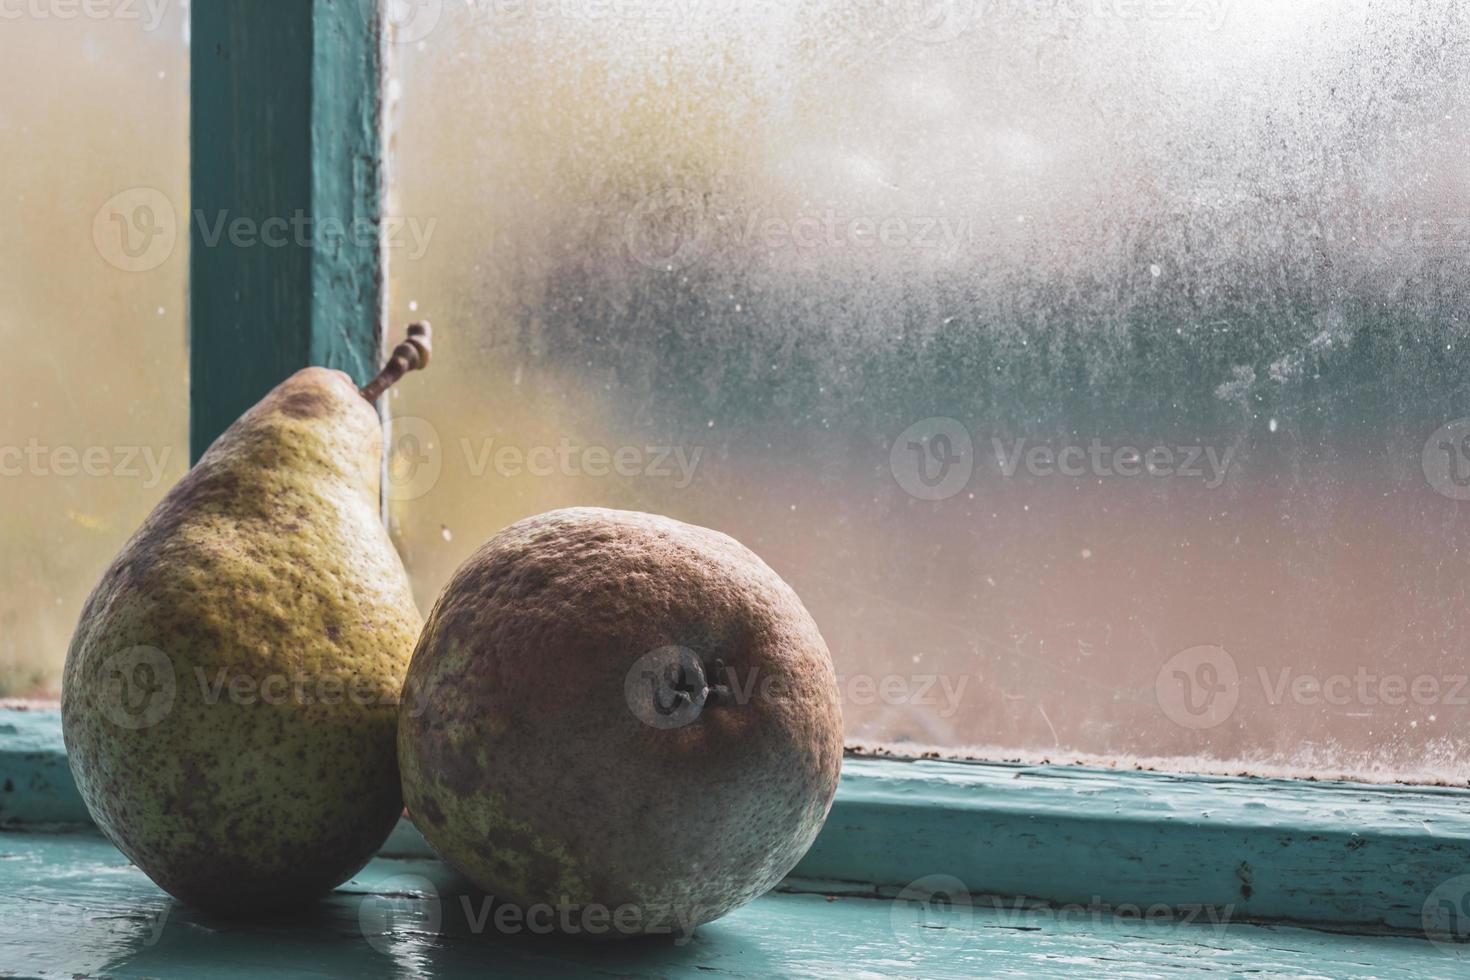 Two large pears after the fall harvest on an old, misted blue window. photo